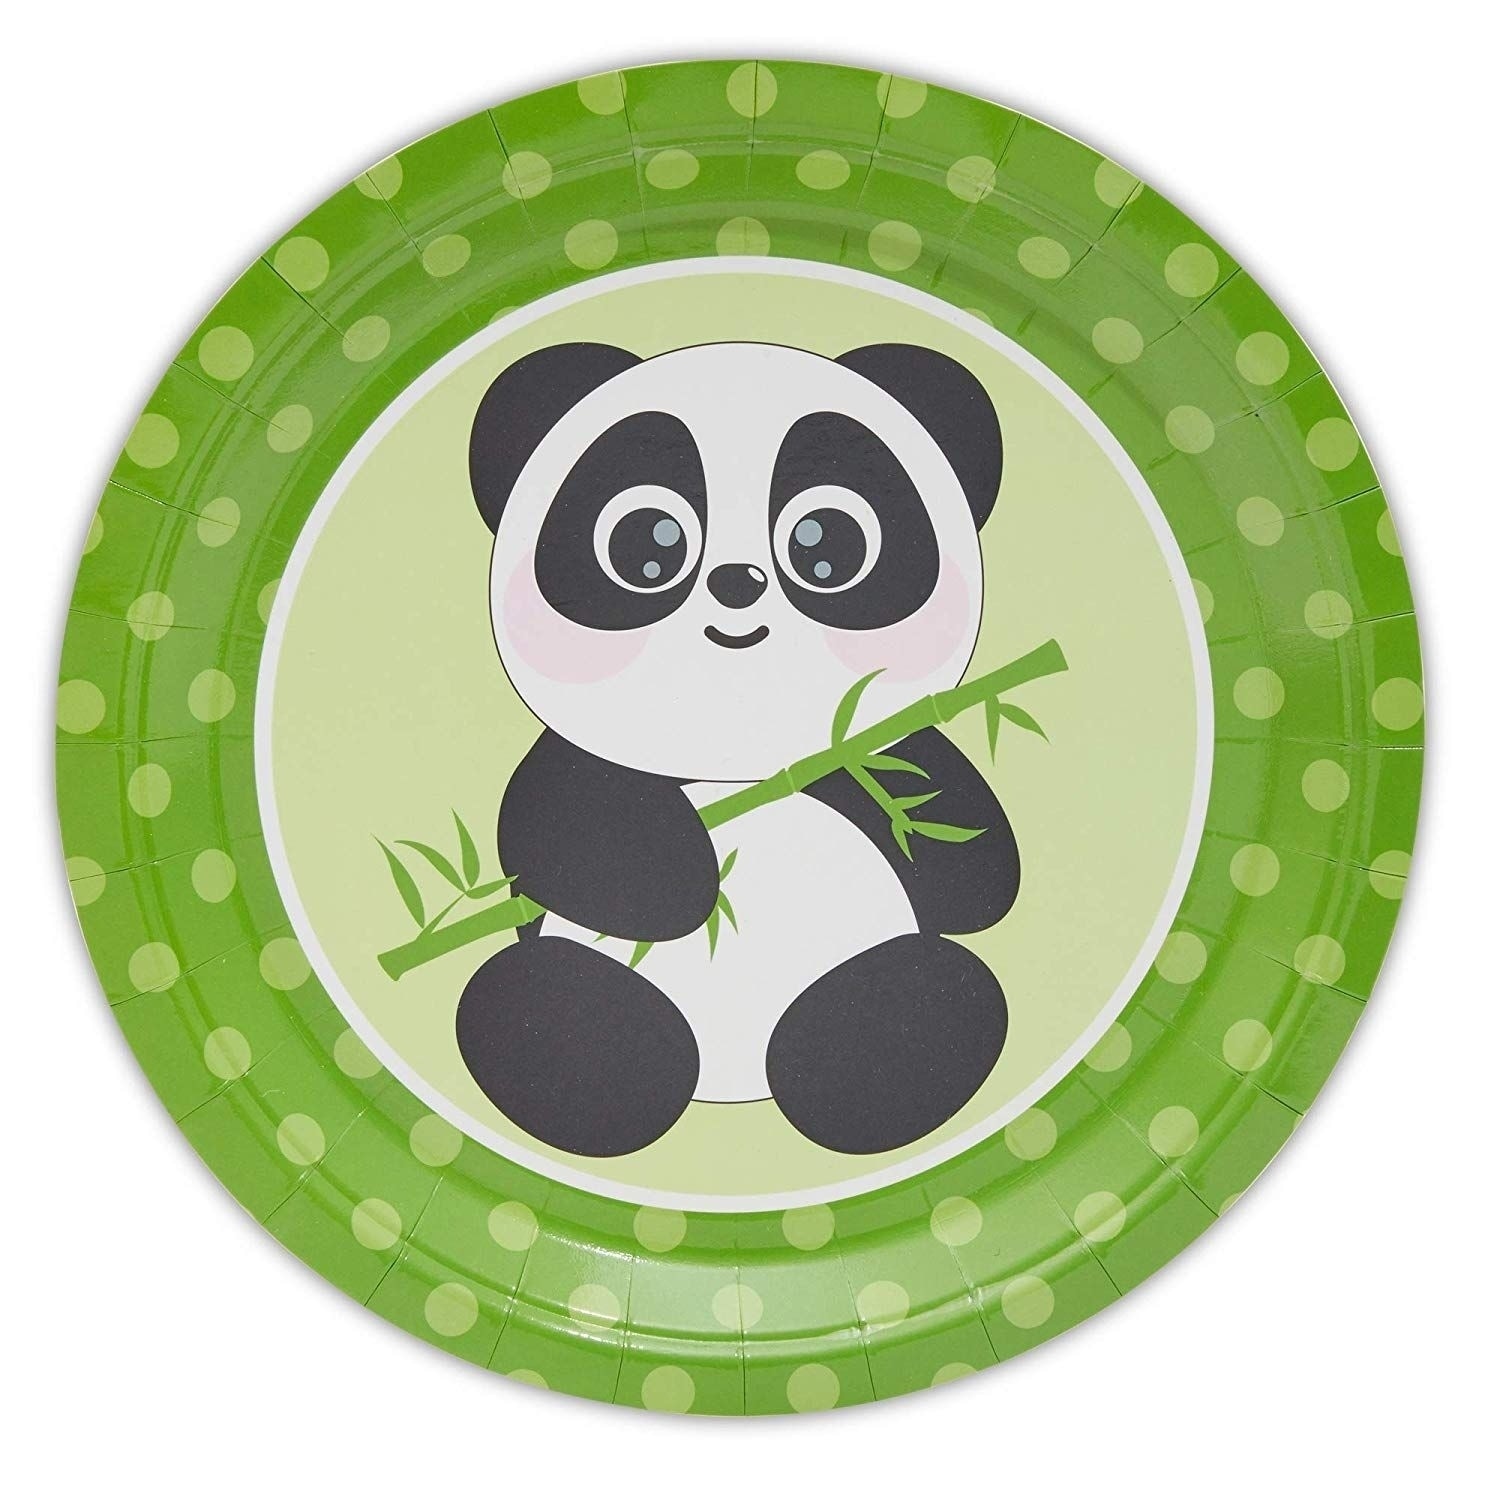 Serves 24 Panda Animal Party Supplies Decorations for Kids Boys Girls - 9"x9"